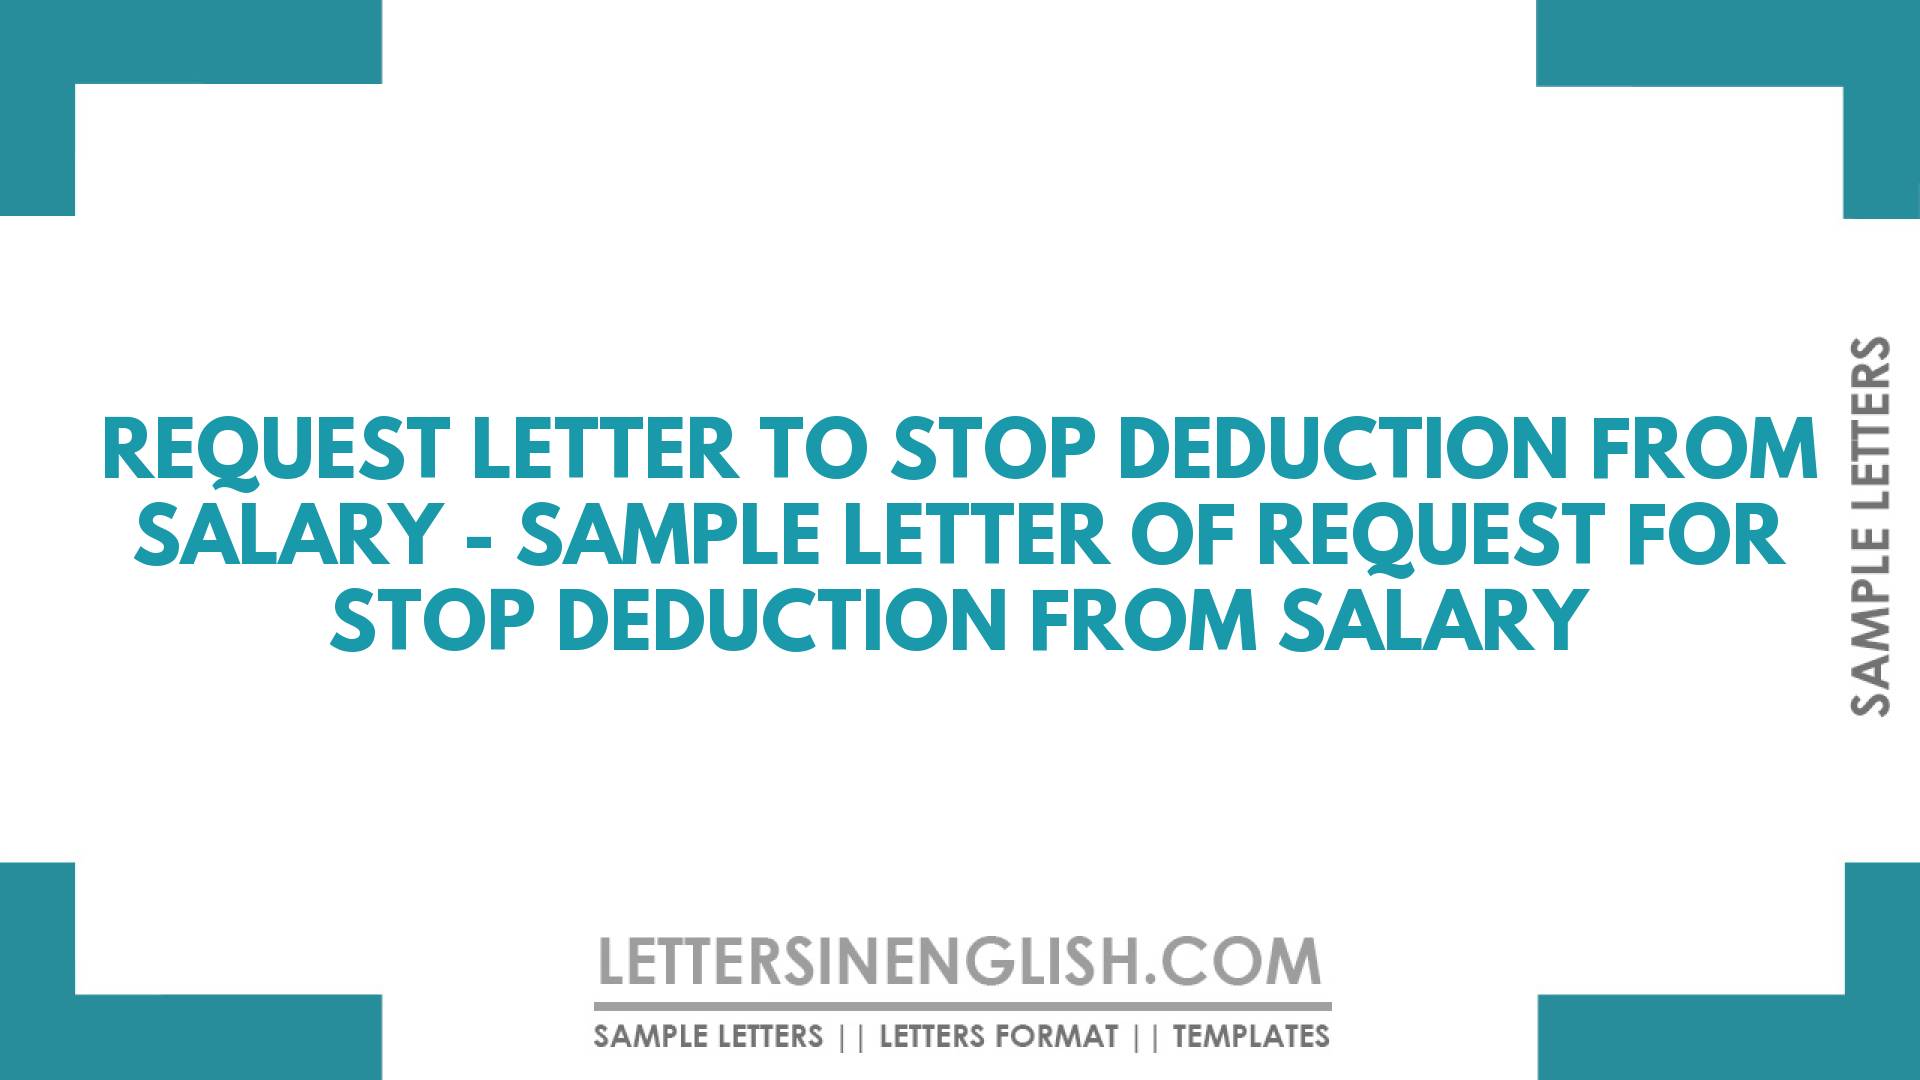 Request Letter to Stop Deduction from Salary – Sample Letter of Request for Stop Deduction  from Salary